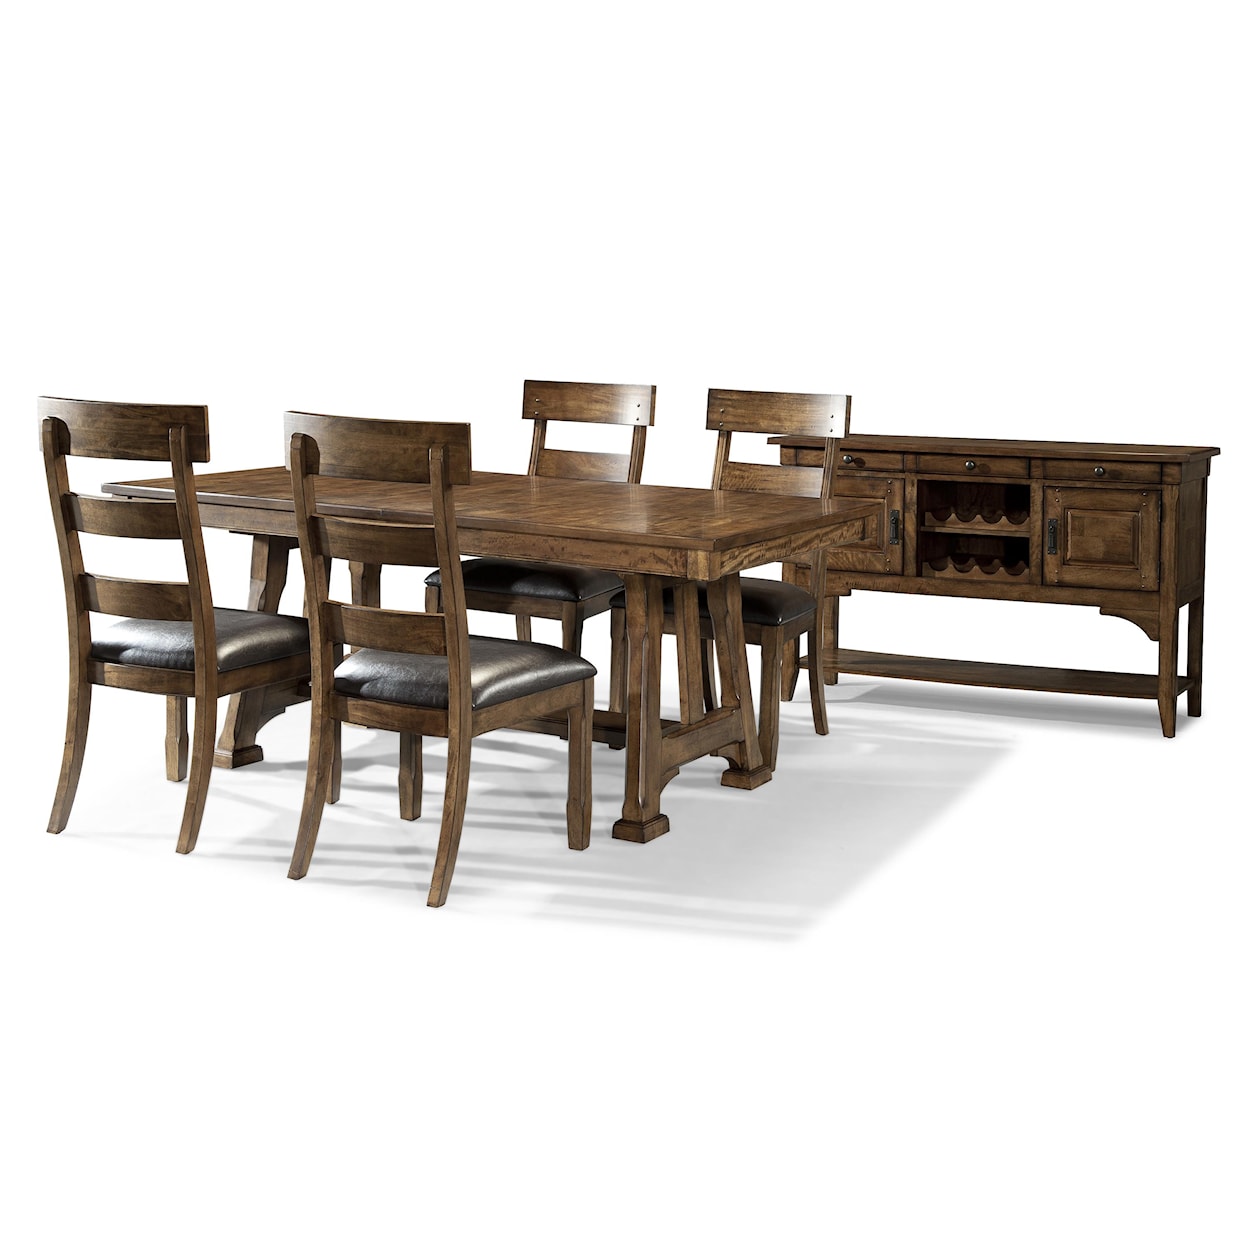 AAmerica Ozark 5 Piece Trestle Table and Chair Set